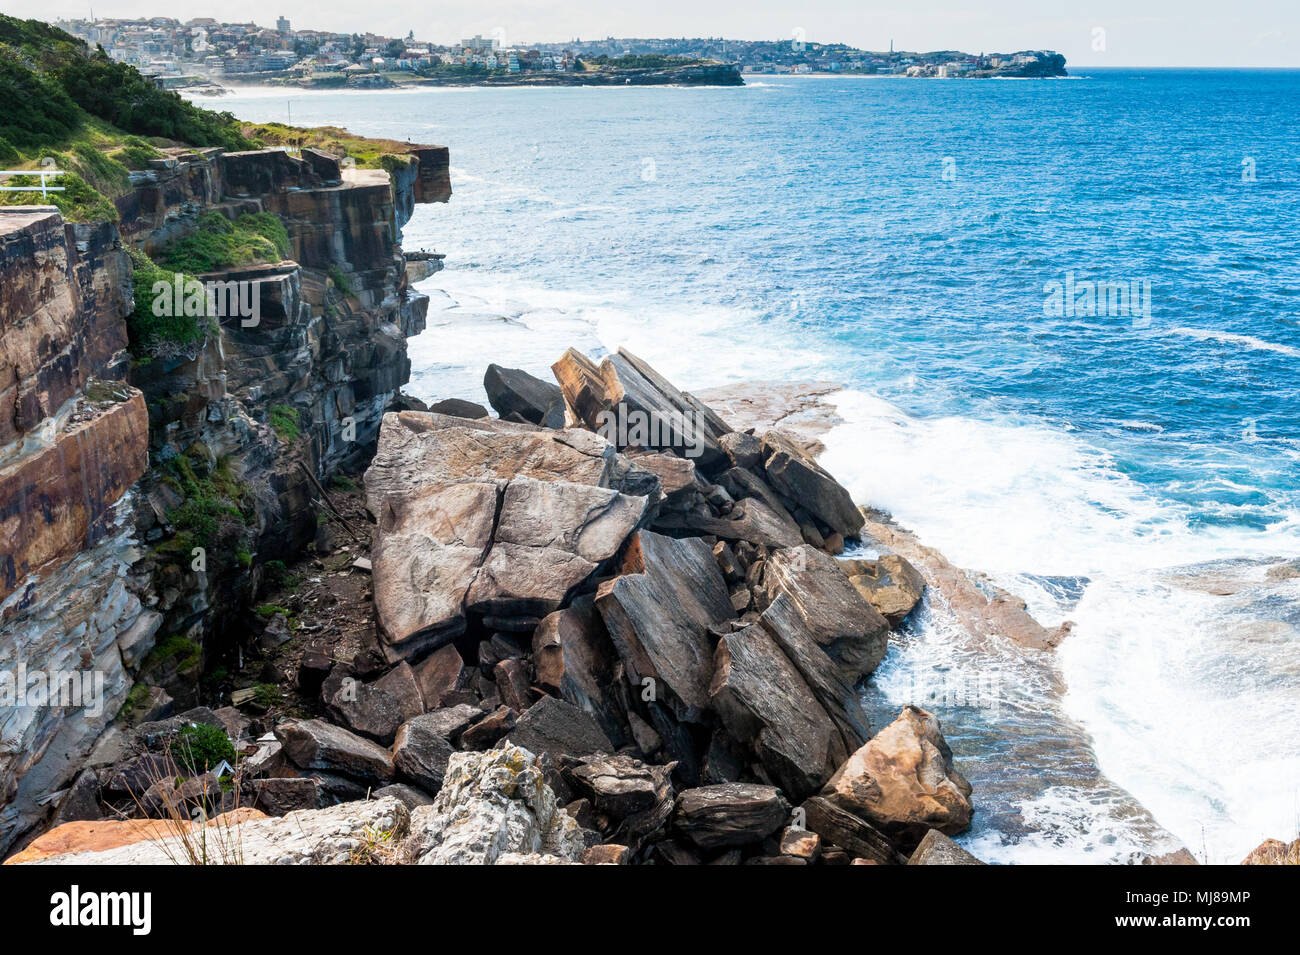 Massive rocks and boulders slip from the cliff into the sea as erosion impacts the shoreline of the famous Coogee Beach walk towards Bondi, Sydney. Stock Photo